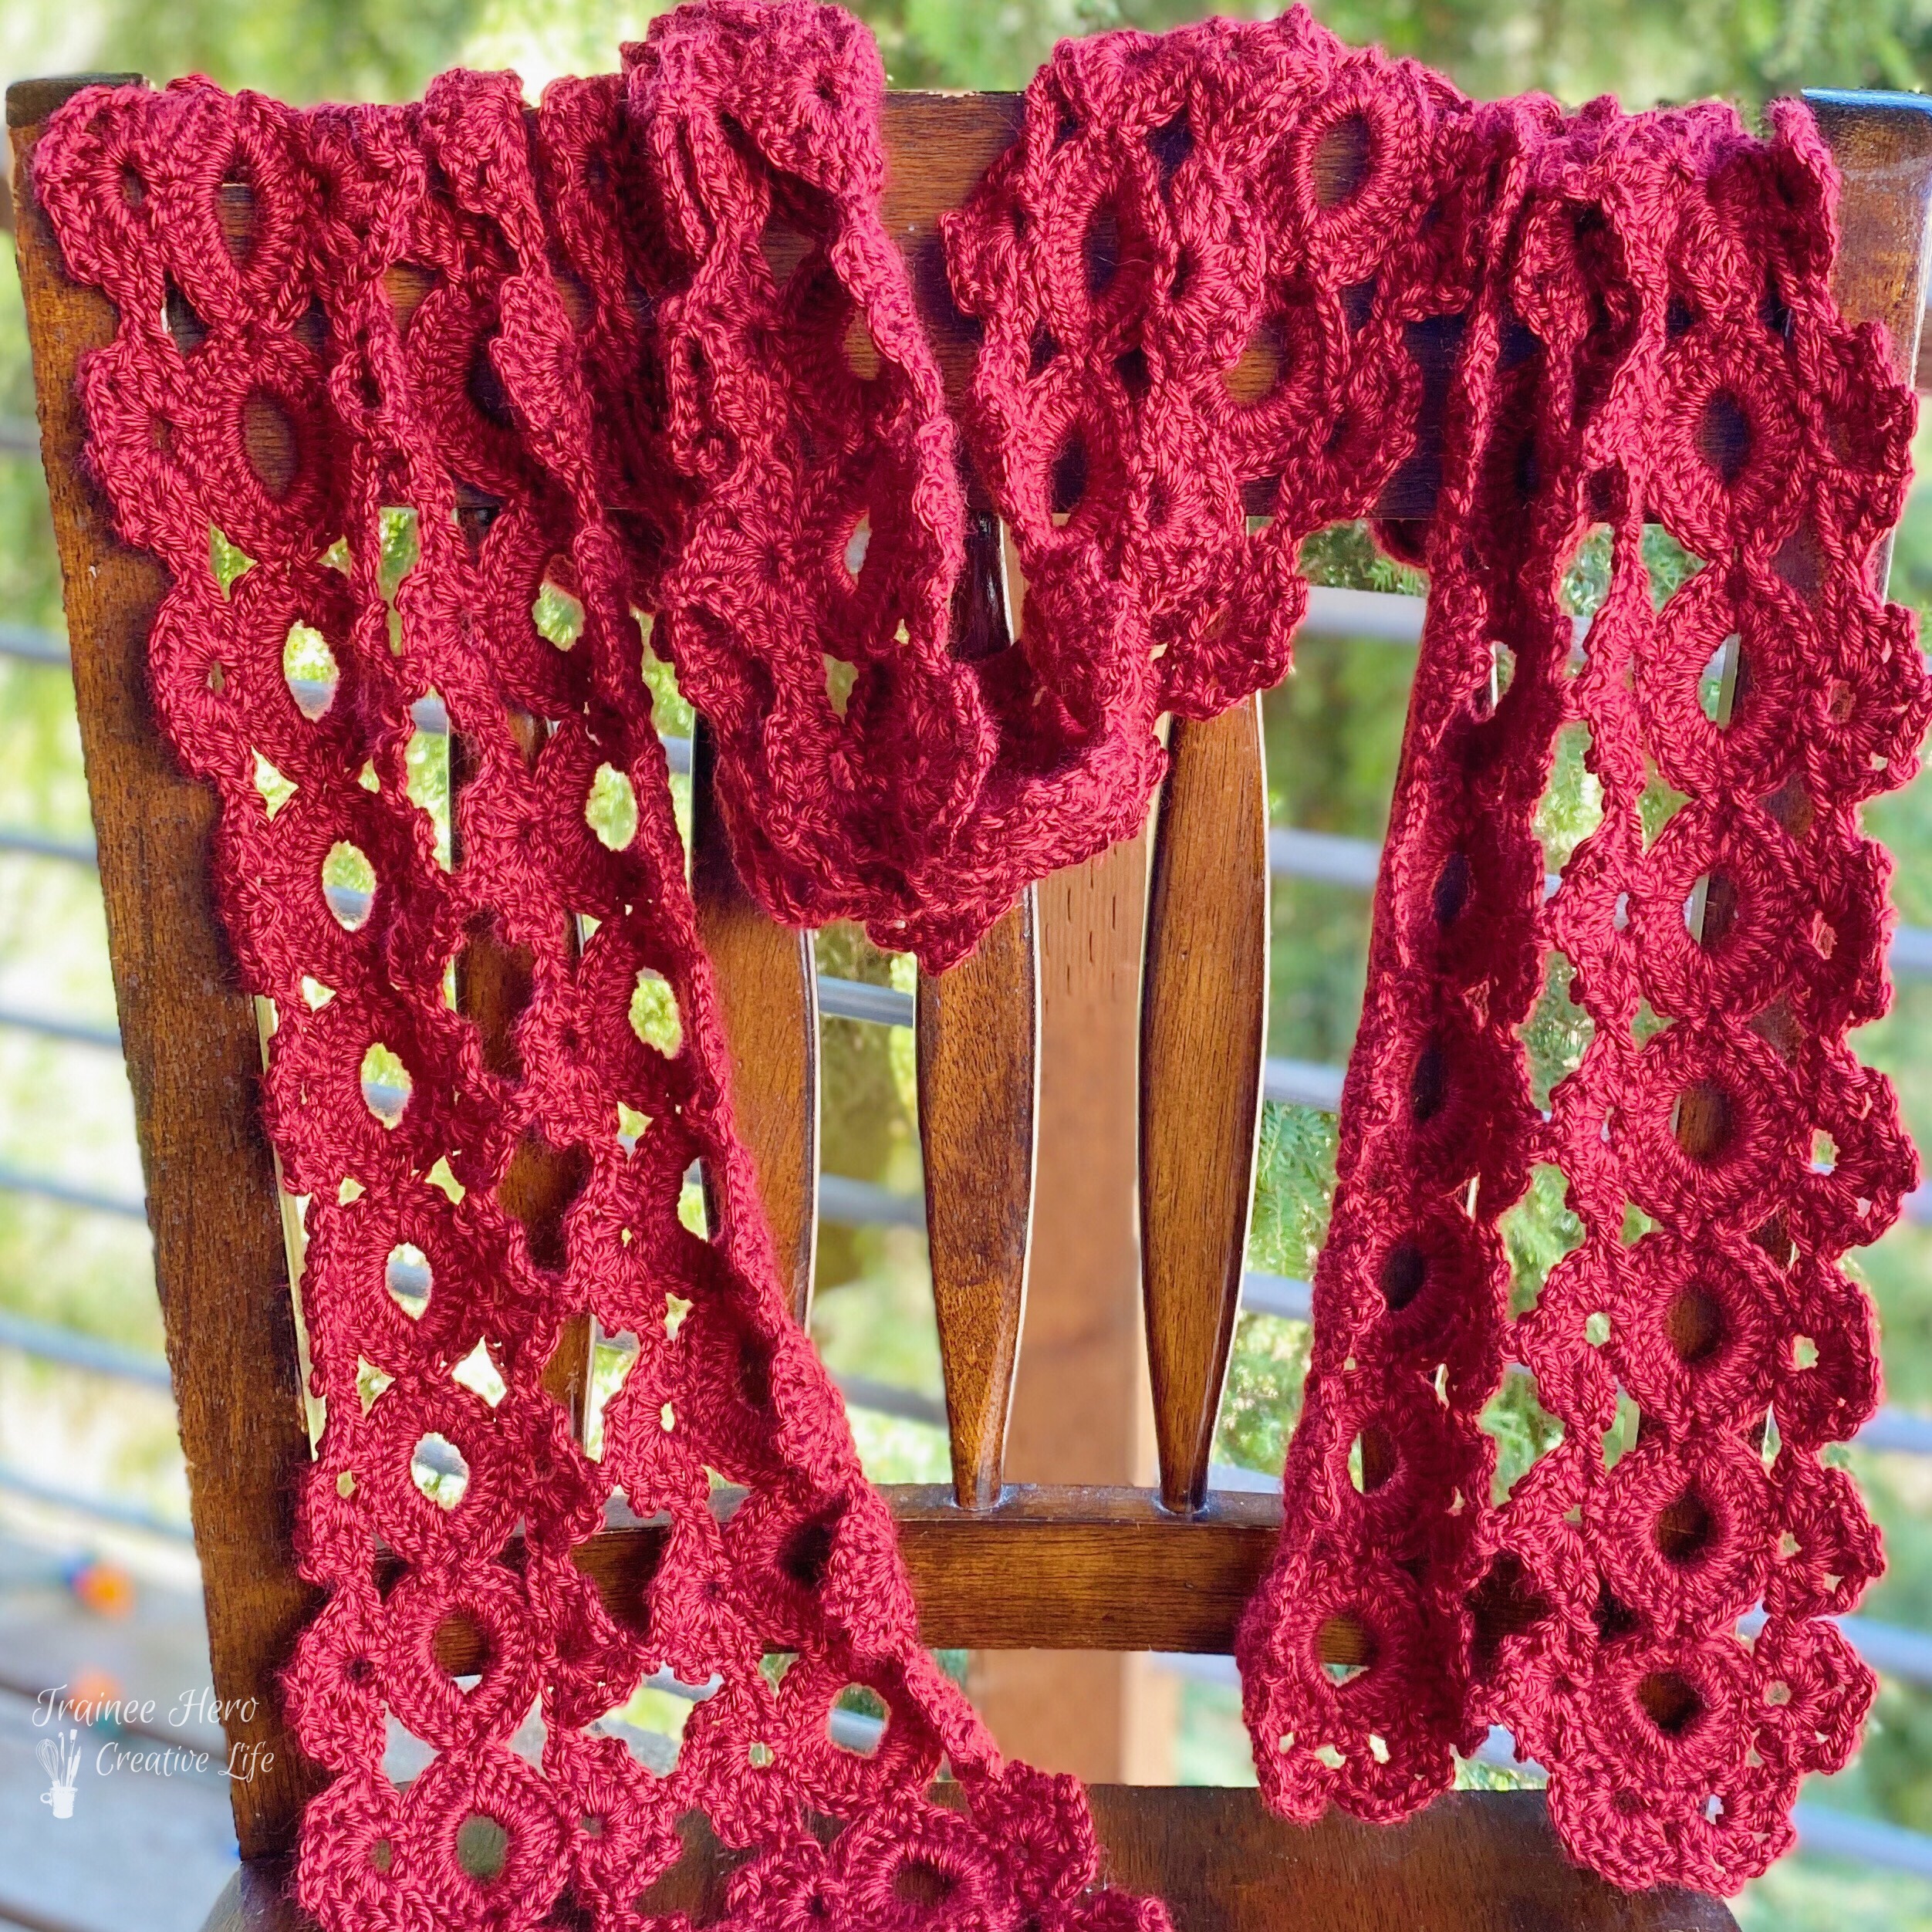 Poppy Fields Scarf, a crocheted scarf, draped over a chair.